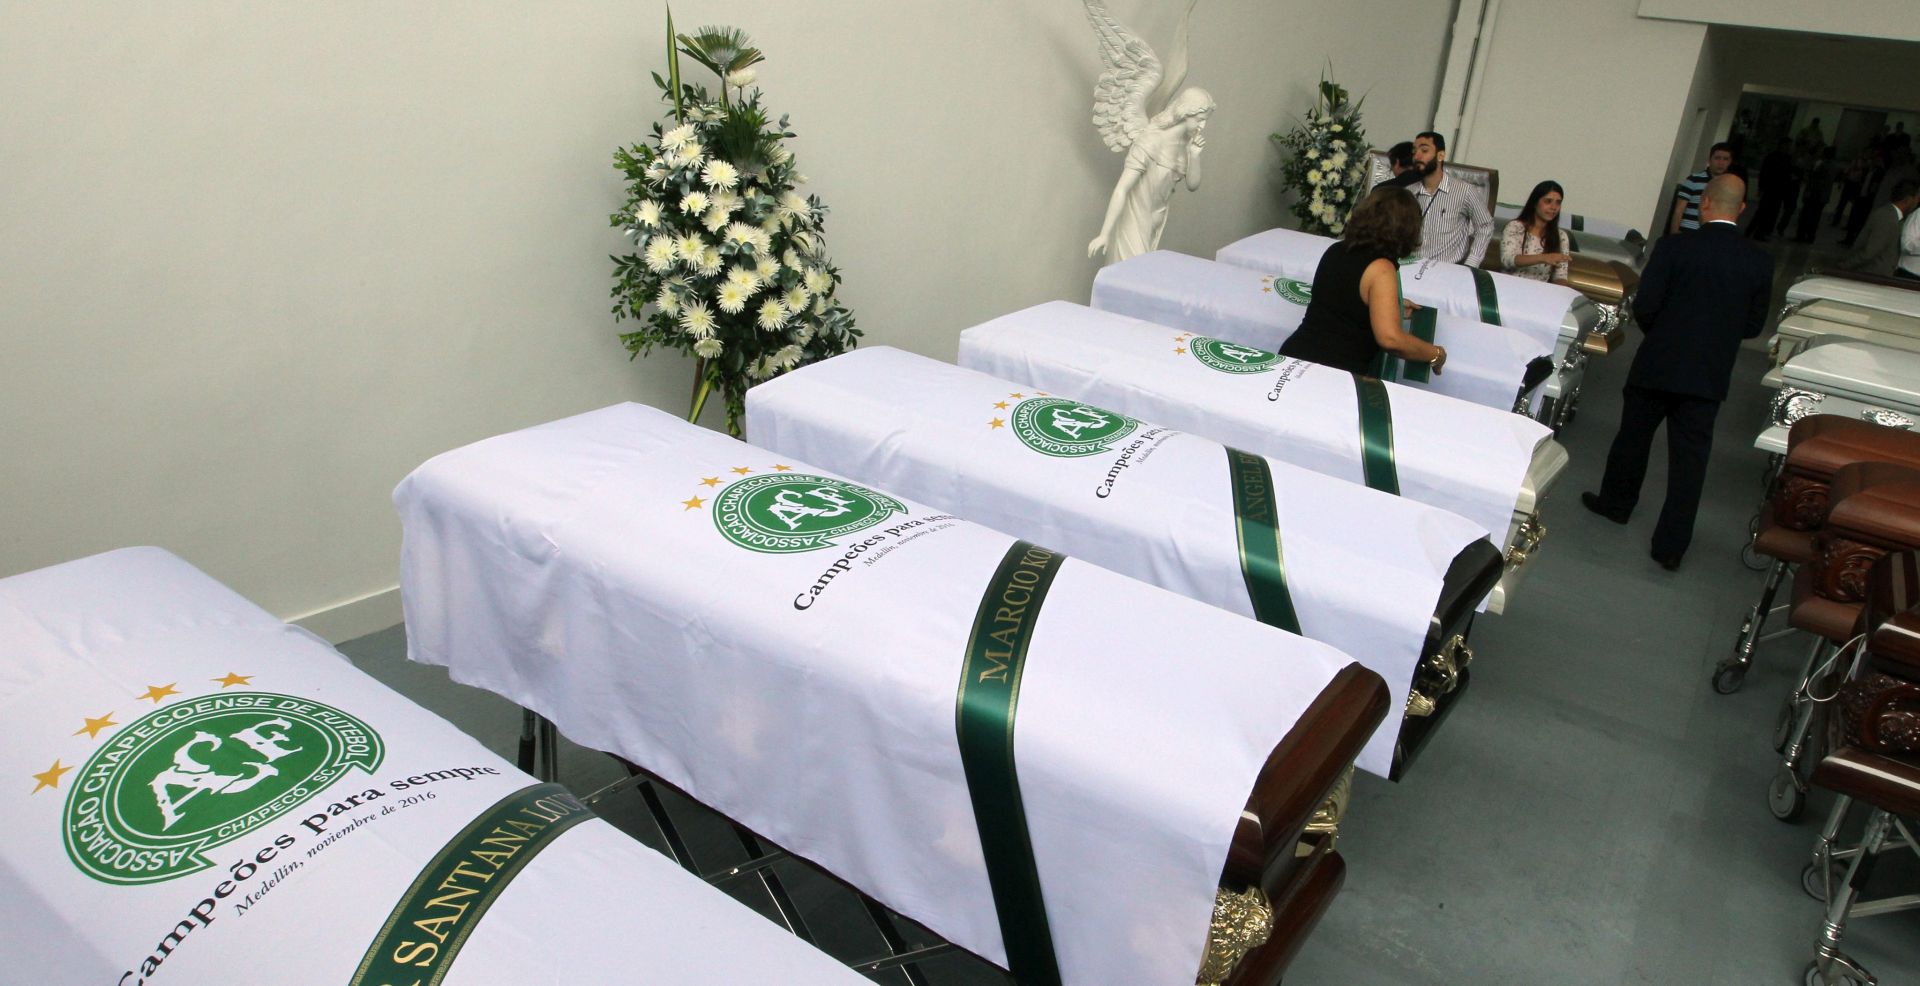 epa05655378 Workers place the Chapecoense soccer team flags at San Vicente funerary at some of the victims of the LaMia Bolivian airline accident, including the players of the Brazilian soccer team Chapecoense, in Medellin, Colombia, 01 December 2016. 71 people died when an aircraft crashed late 28 November 2016 with 77 people on board, including players and staff of the Brazilian soccer club Chapecoense. The plane crashed in a mountainous area outside Medellin, Colombia as it was approaching the Jose Maria Cordoba airport. Chapecoense were scheduled to play in the Copa Sudamericana final against Medellin's Atletico Nacional on 30 November 2016. EPA/MAURICIO DUENAS CASTANEDA  EPA/MAURICIO DUENAS CASTANEDA